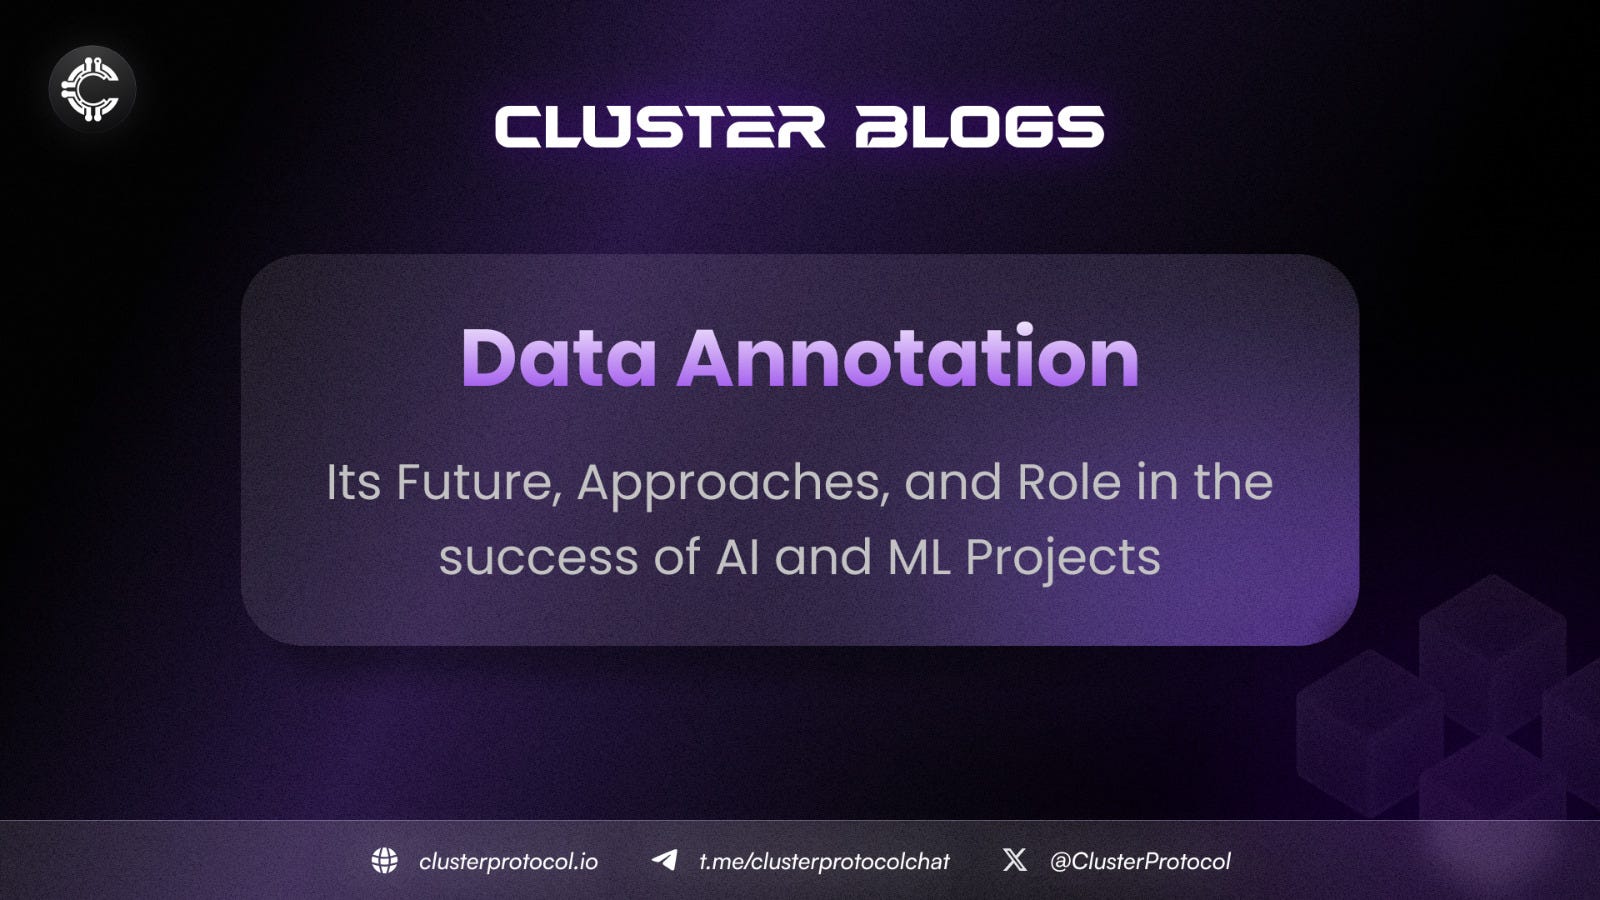 Data Annotation: Its Future, Approaches, and Role in the Success of AI and ML Projects